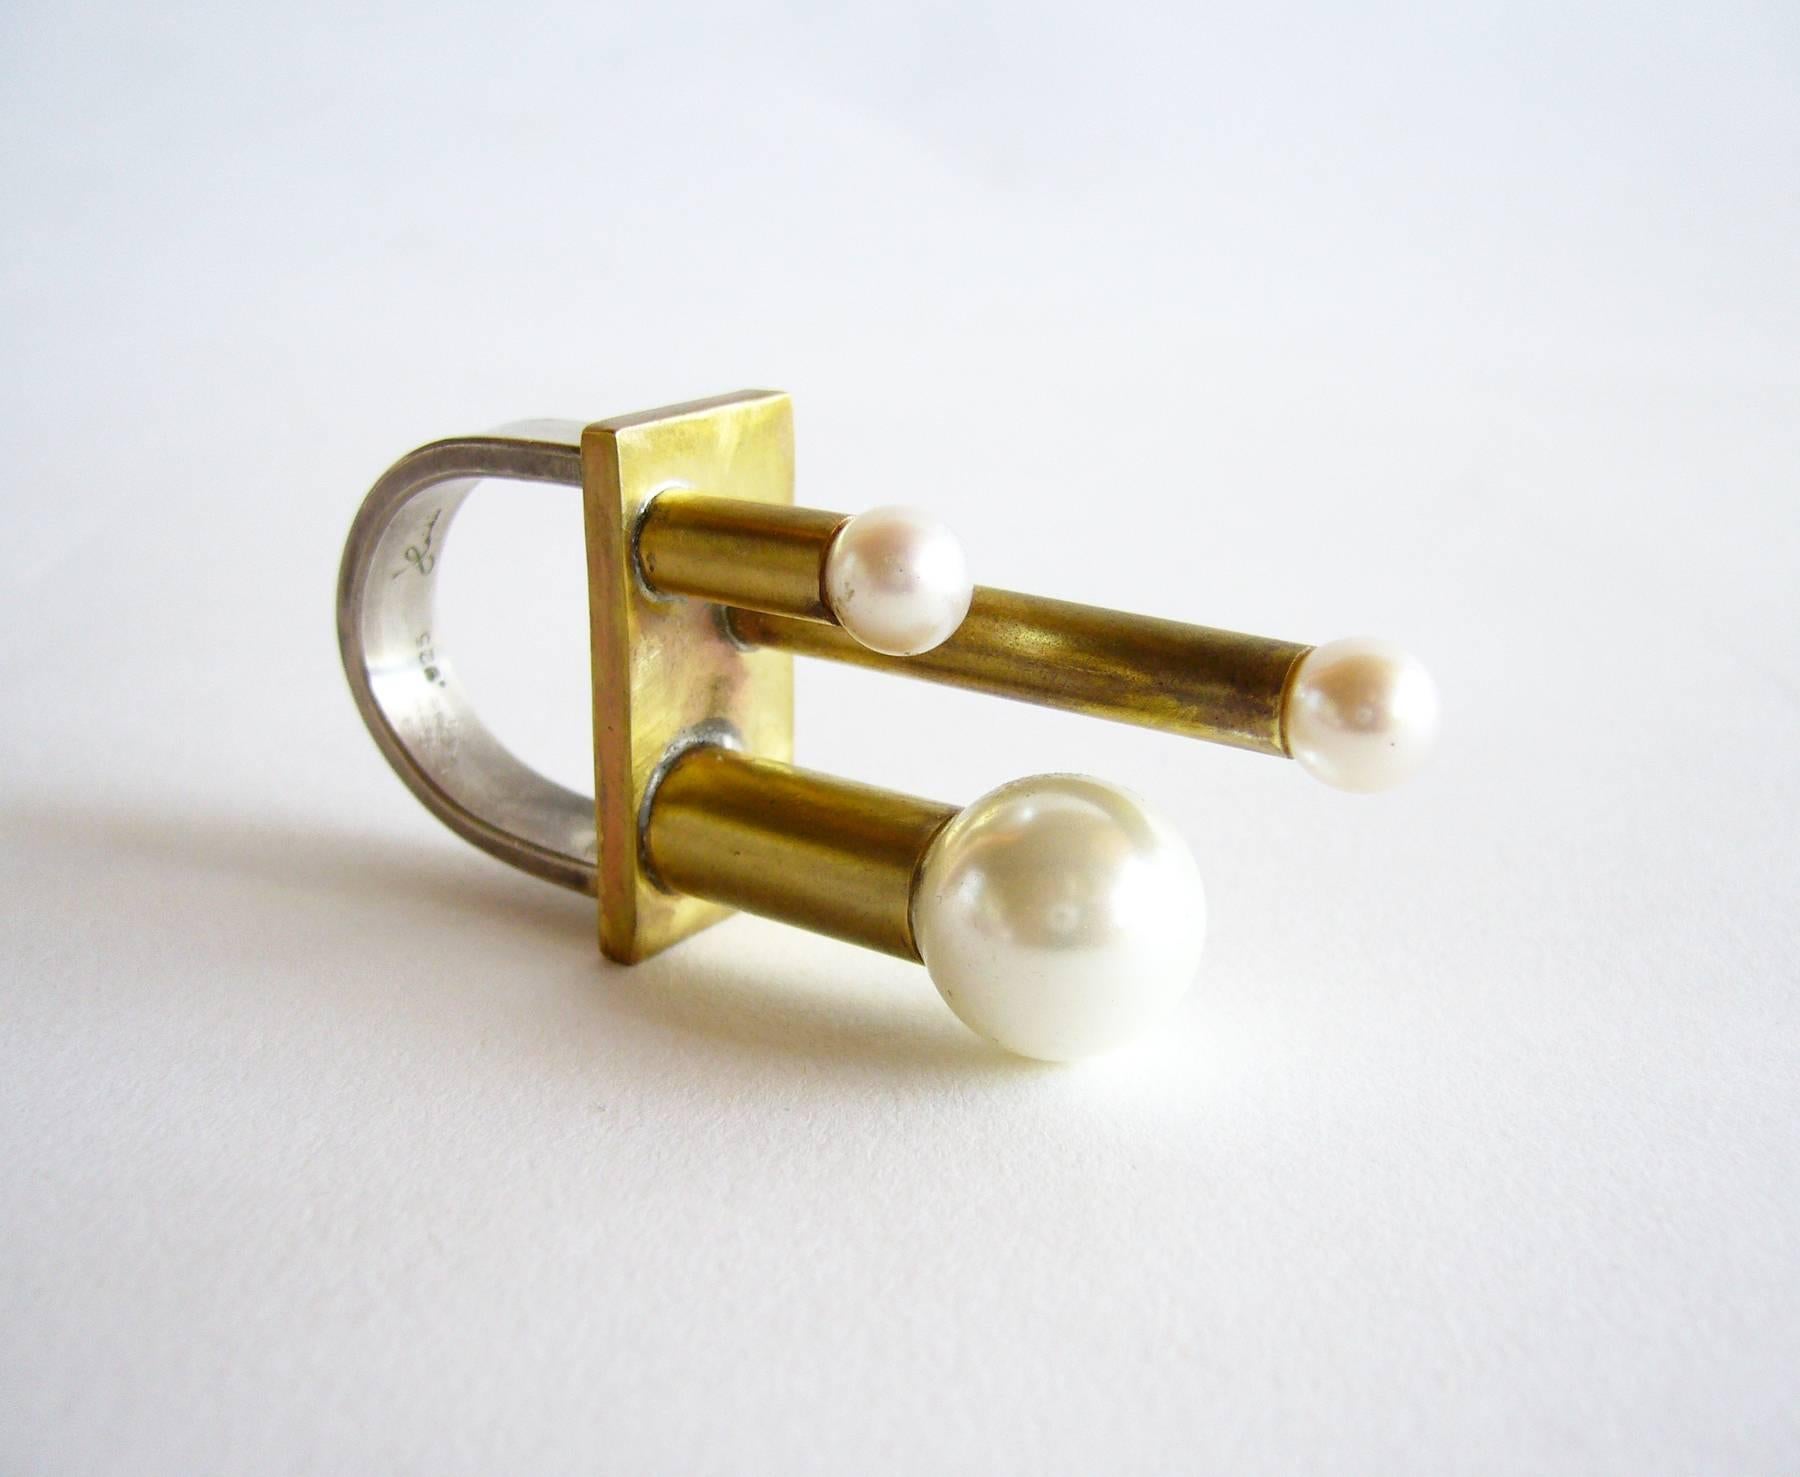 Sterling silver, brass and pearl ring created by Heidi Abrahamson of Phoenix, Arizona.  Ring is a finger size 7.5 and sits 1.5